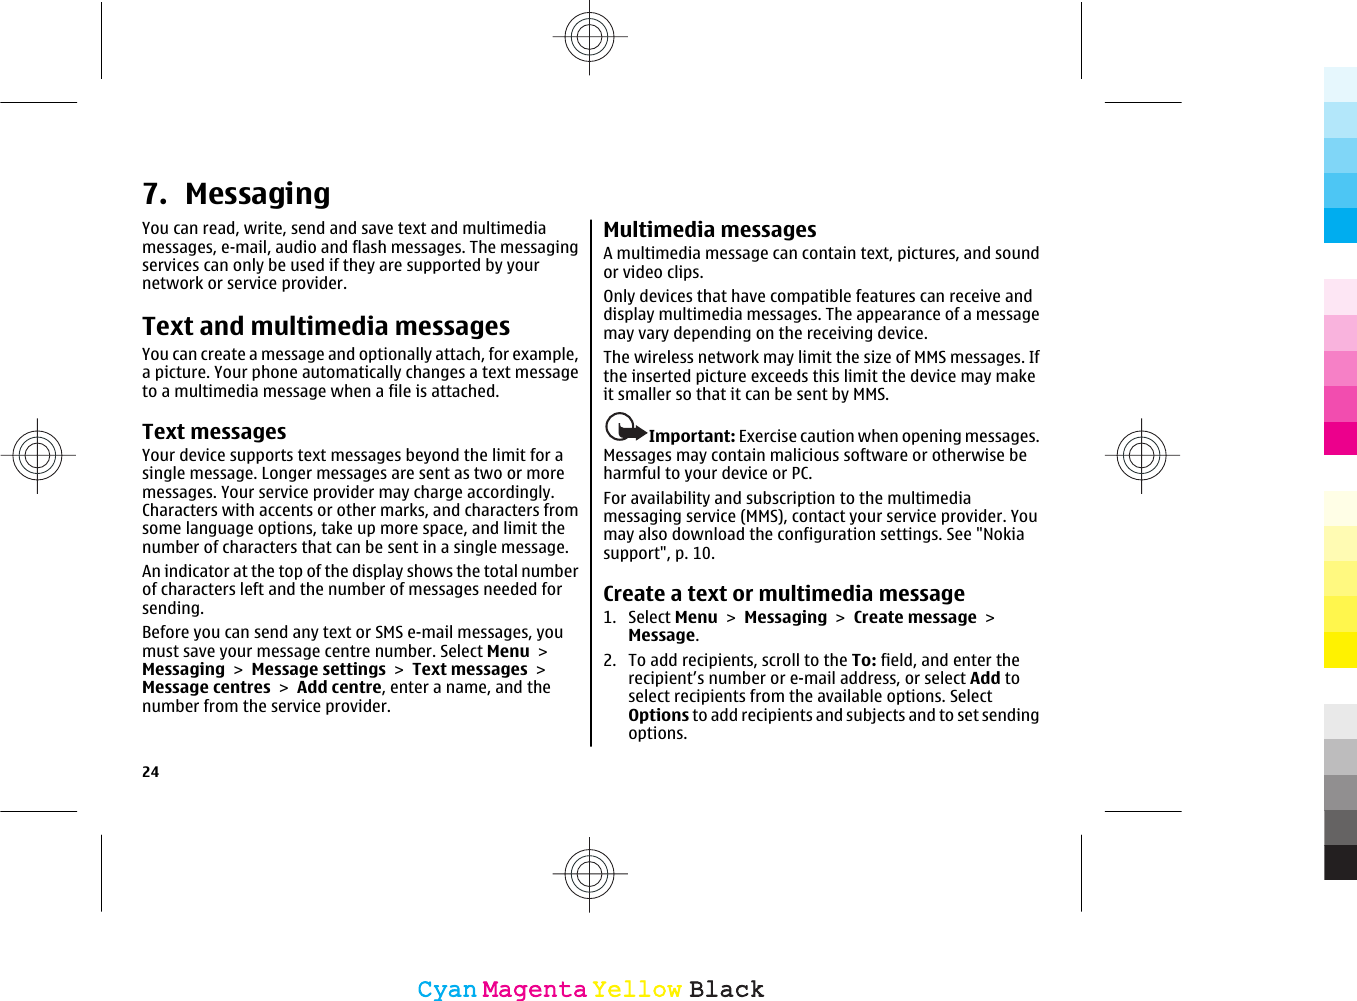 7. MessagingYou can read, write, send and save text and multimediamessages, e-mail, audio and flash messages. The messagingservices can only be used if they are supported by yournetwork or service provider.Text and multimedia messagesYou can create a message and optionally attach, for example,a picture. Your phone automatically changes a text messageto a multimedia message when a file is attached.Text messagesYour device supports text messages beyond the limit for asingle message. Longer messages are sent as two or moremessages. Your service provider may charge accordingly.Characters with accents or other marks, and characters fromsome language options, take up more space, and limit thenumber of characters that can be sent in a single message.An indicator at the top of the display shows the total numberof characters left and the number of messages needed forsending.Before you can send any text or SMS e-mail messages, youmust save your message centre number. Select Menu &gt;Messaging &gt; Message settings &gt; Text messages &gt;Message centres &gt; Add centre, enter a name, and thenumber from the service provider.Multimedia messagesA multimedia message can contain text, pictures, and soundor video clips.Only devices that have compatible features can receive anddisplay multimedia messages. The appearance of a messagemay vary depending on the receiving device.The wireless network may limit the size of MMS messages. Ifthe inserted picture exceeds this limit the device may makeit smaller so that it can be sent by MMS.Important: Exercise caution when opening messages.Messages may contain malicious software or otherwise beharmful to your device or PC.For availability and subscription to the multimediamessaging service (MMS), contact your service provider. Youmay also download the configuration settings. See &quot;Nokiasupport&quot;, p. 10.Create a text or multimedia message1. Select Menu &gt; Messaging &gt; Create message &gt;Message.2. To add recipients, scroll to the To: field, and enter therecipient’s number or e-mail address, or select Add toselect recipients from the available options. SelectOptions to add recipients and subjects and to set sendingoptions.24CyanCyanMagentaMagentaYellowYellowBlackBlack